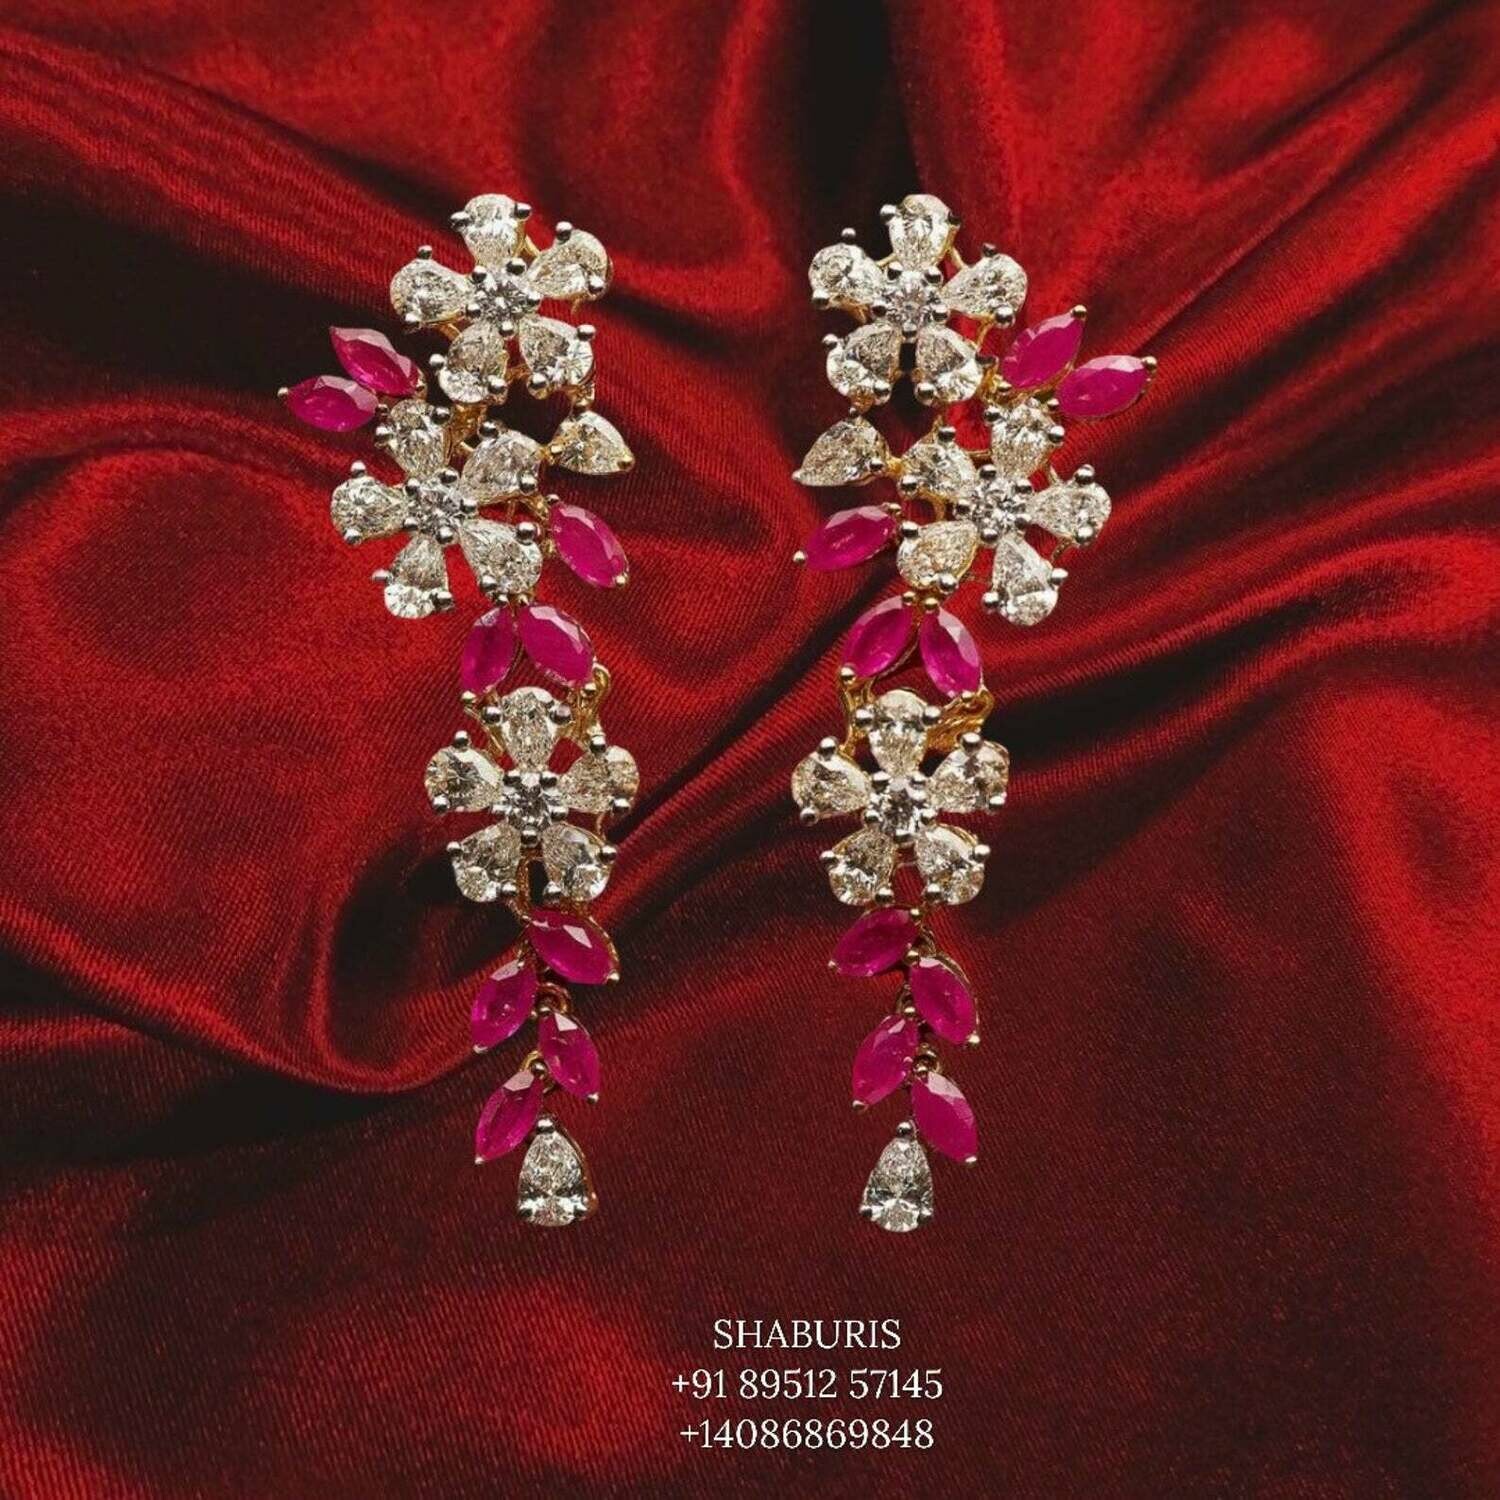 Latest Indian Jewelry,South Indian Jewelry,Pure silver jewelry,ruby diamond earrings,south indian jewelry